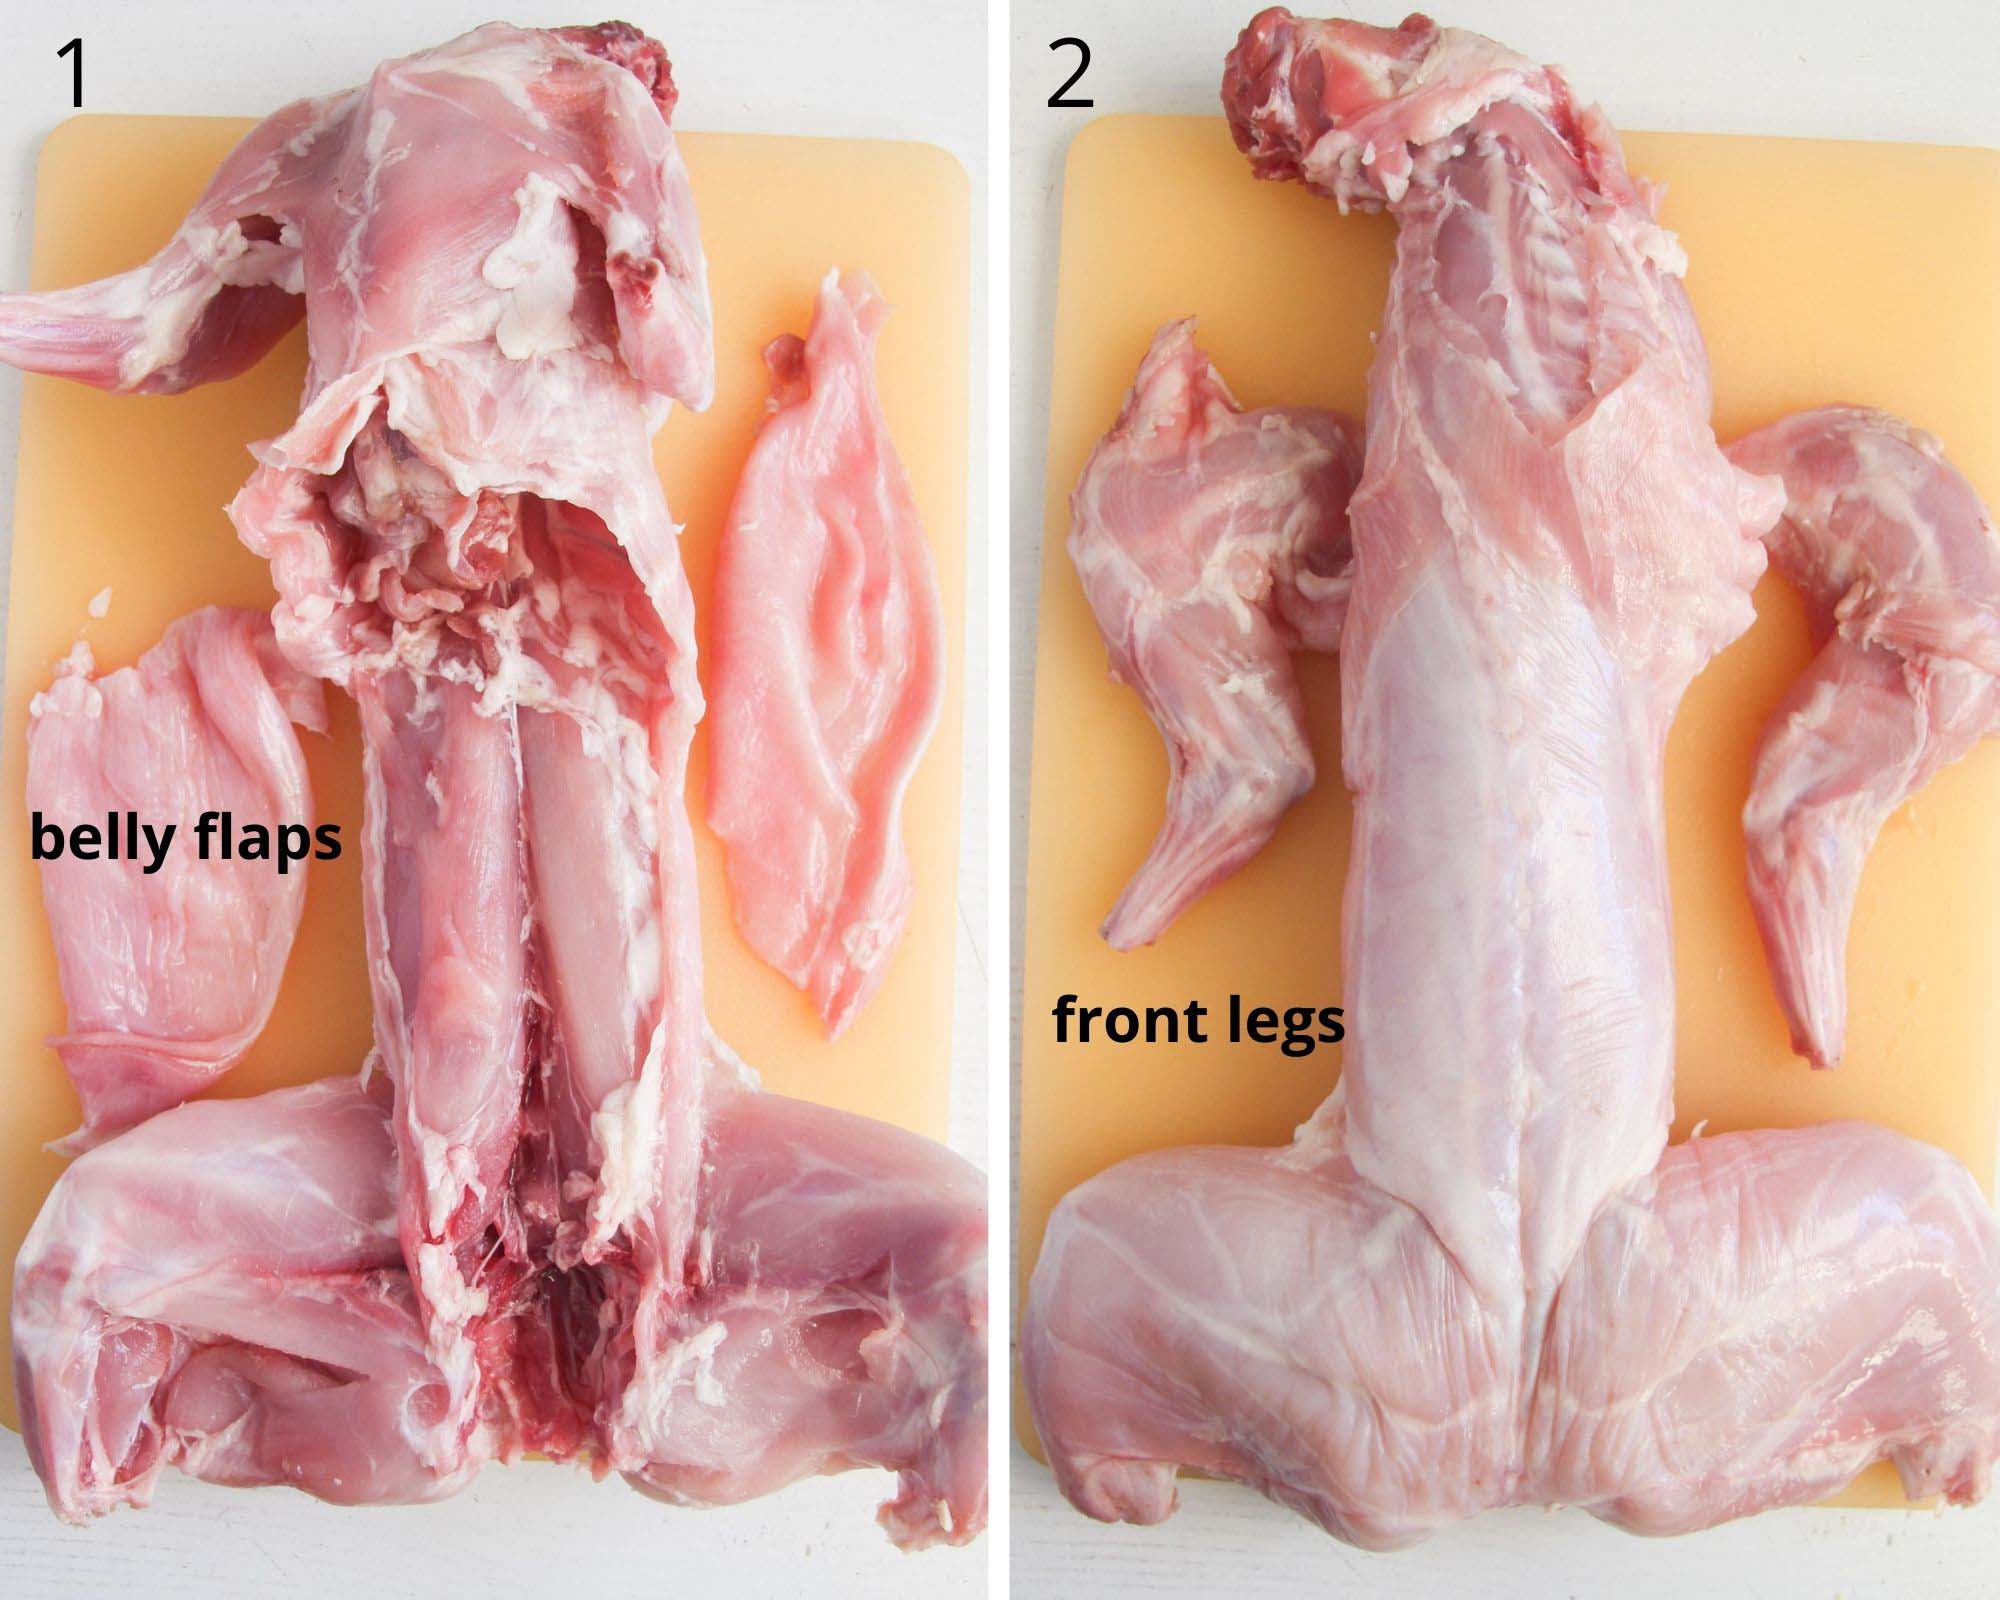 cutting belly flaps and front legs of rabbit.